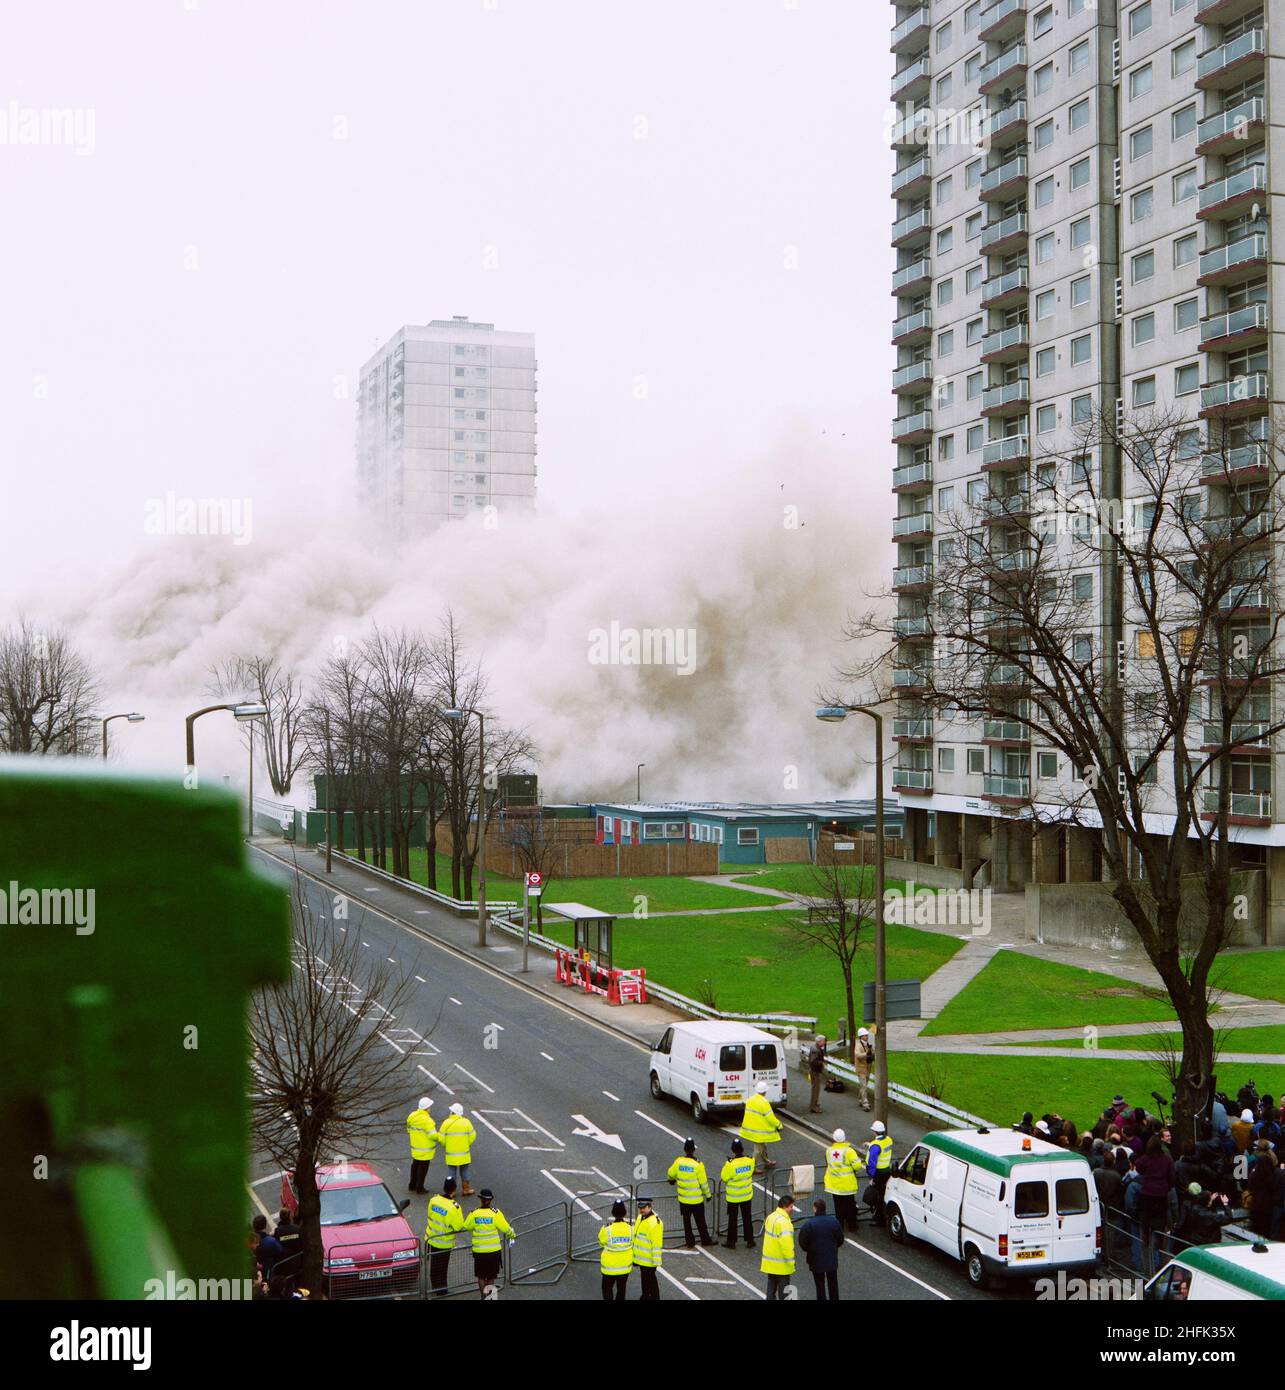 Holly Street Estate, Dalston, Hackney, London, 24/03/1996. A view of tower blocks on the Holly Street Estate, showing a cloud of dust caused by the demolition of Rowan Court at the centre of the group. Laing Homes Special Projects worked in partnership with Hackney Council and a consortium of housing associations to redevelop the estate which had originally been built in the 1970s. The aim of the project was to provide over 1000 new and refurbished homes over a 6 year period, following traditional street patterns and providing gardens for residents. This photograph is part of a batch taken to Stock Photo